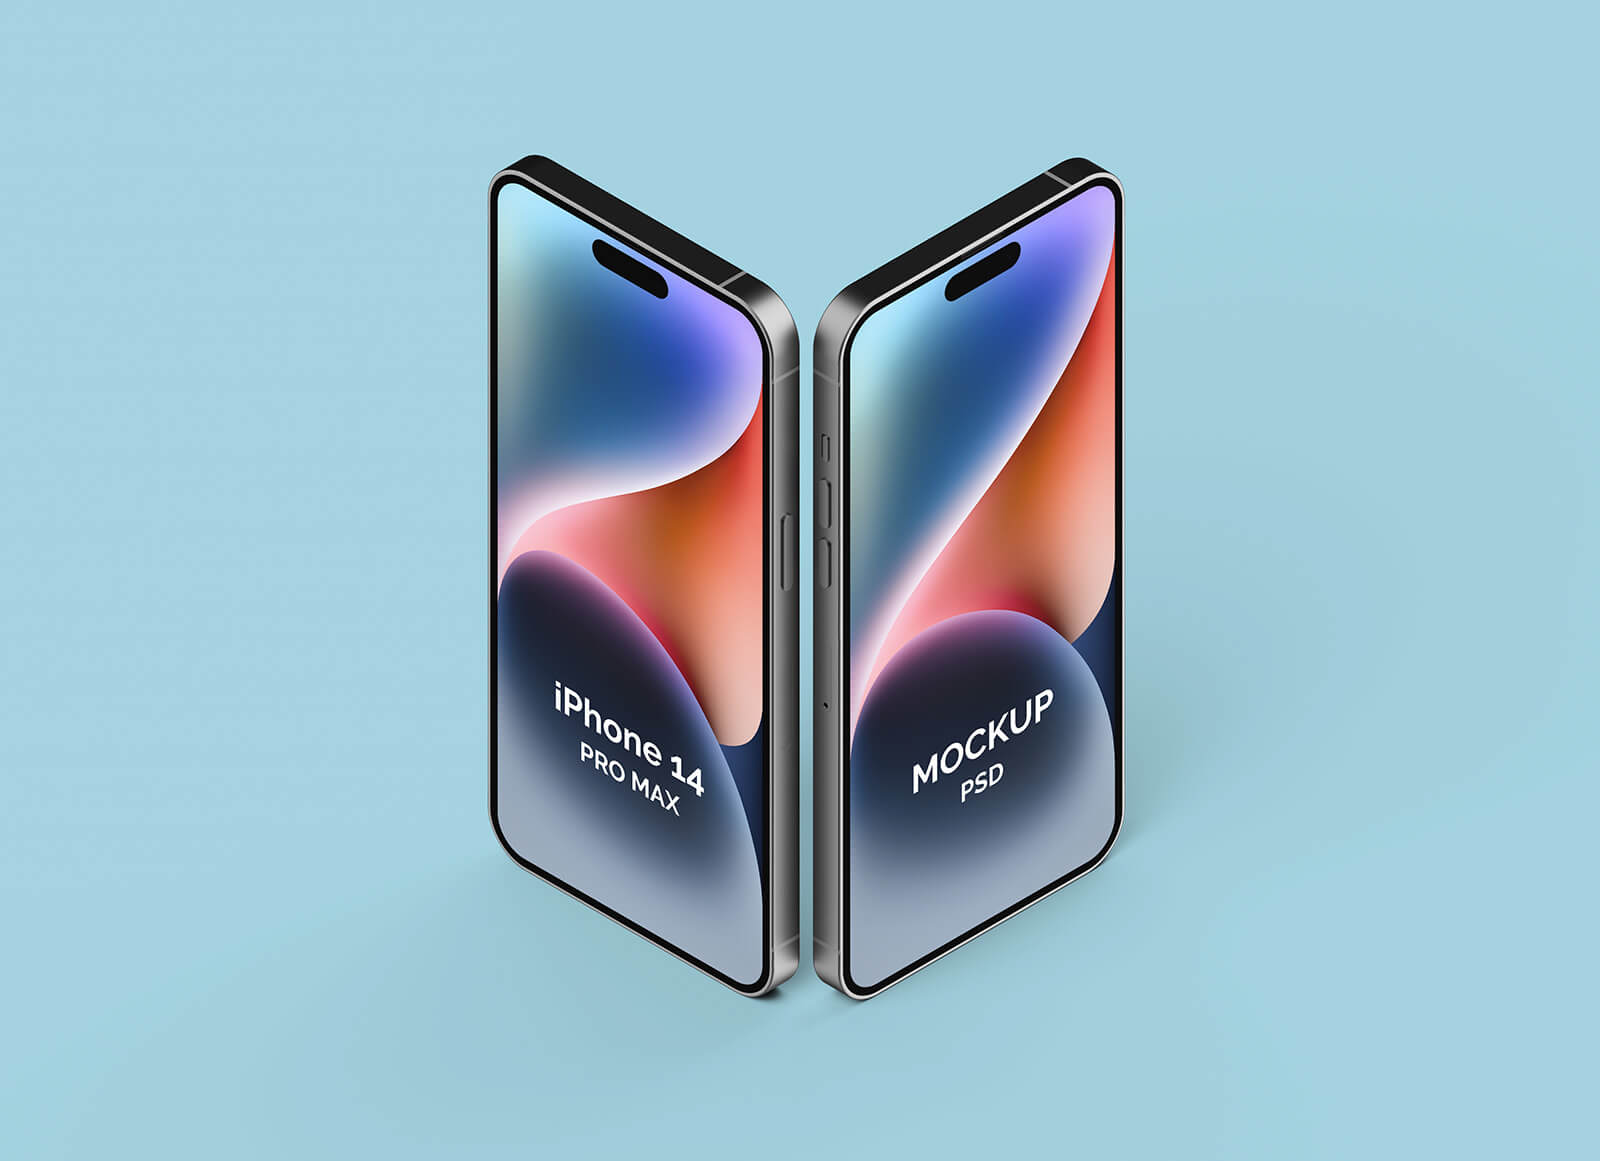 Double iPhone 14 Pro maquette max